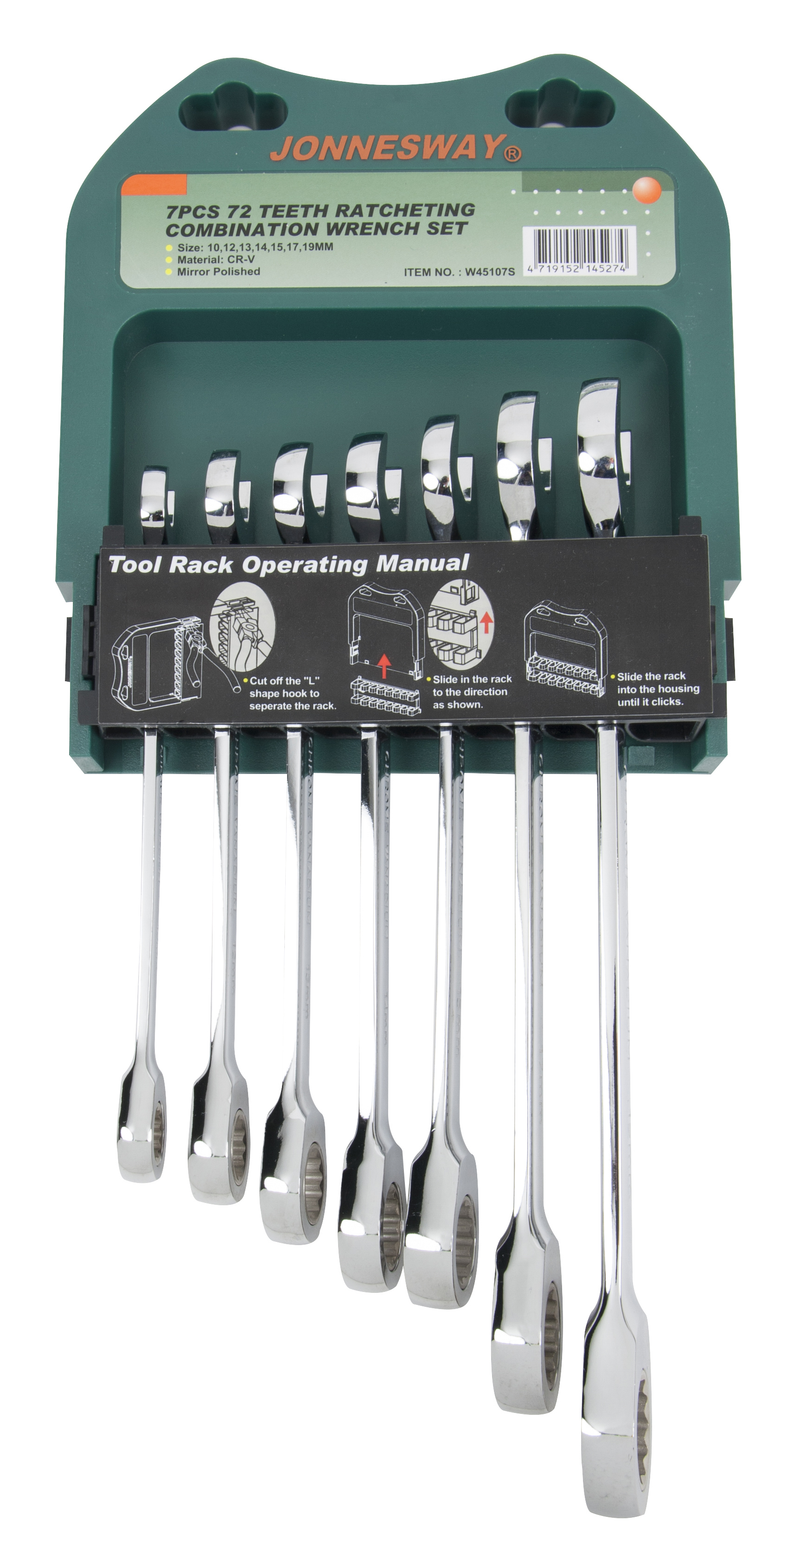 W45107S / 7 PCS 72 TEETH RATCHETING COMBINATION WRENCH SET METRIC SIZE: 10 to 19 MM